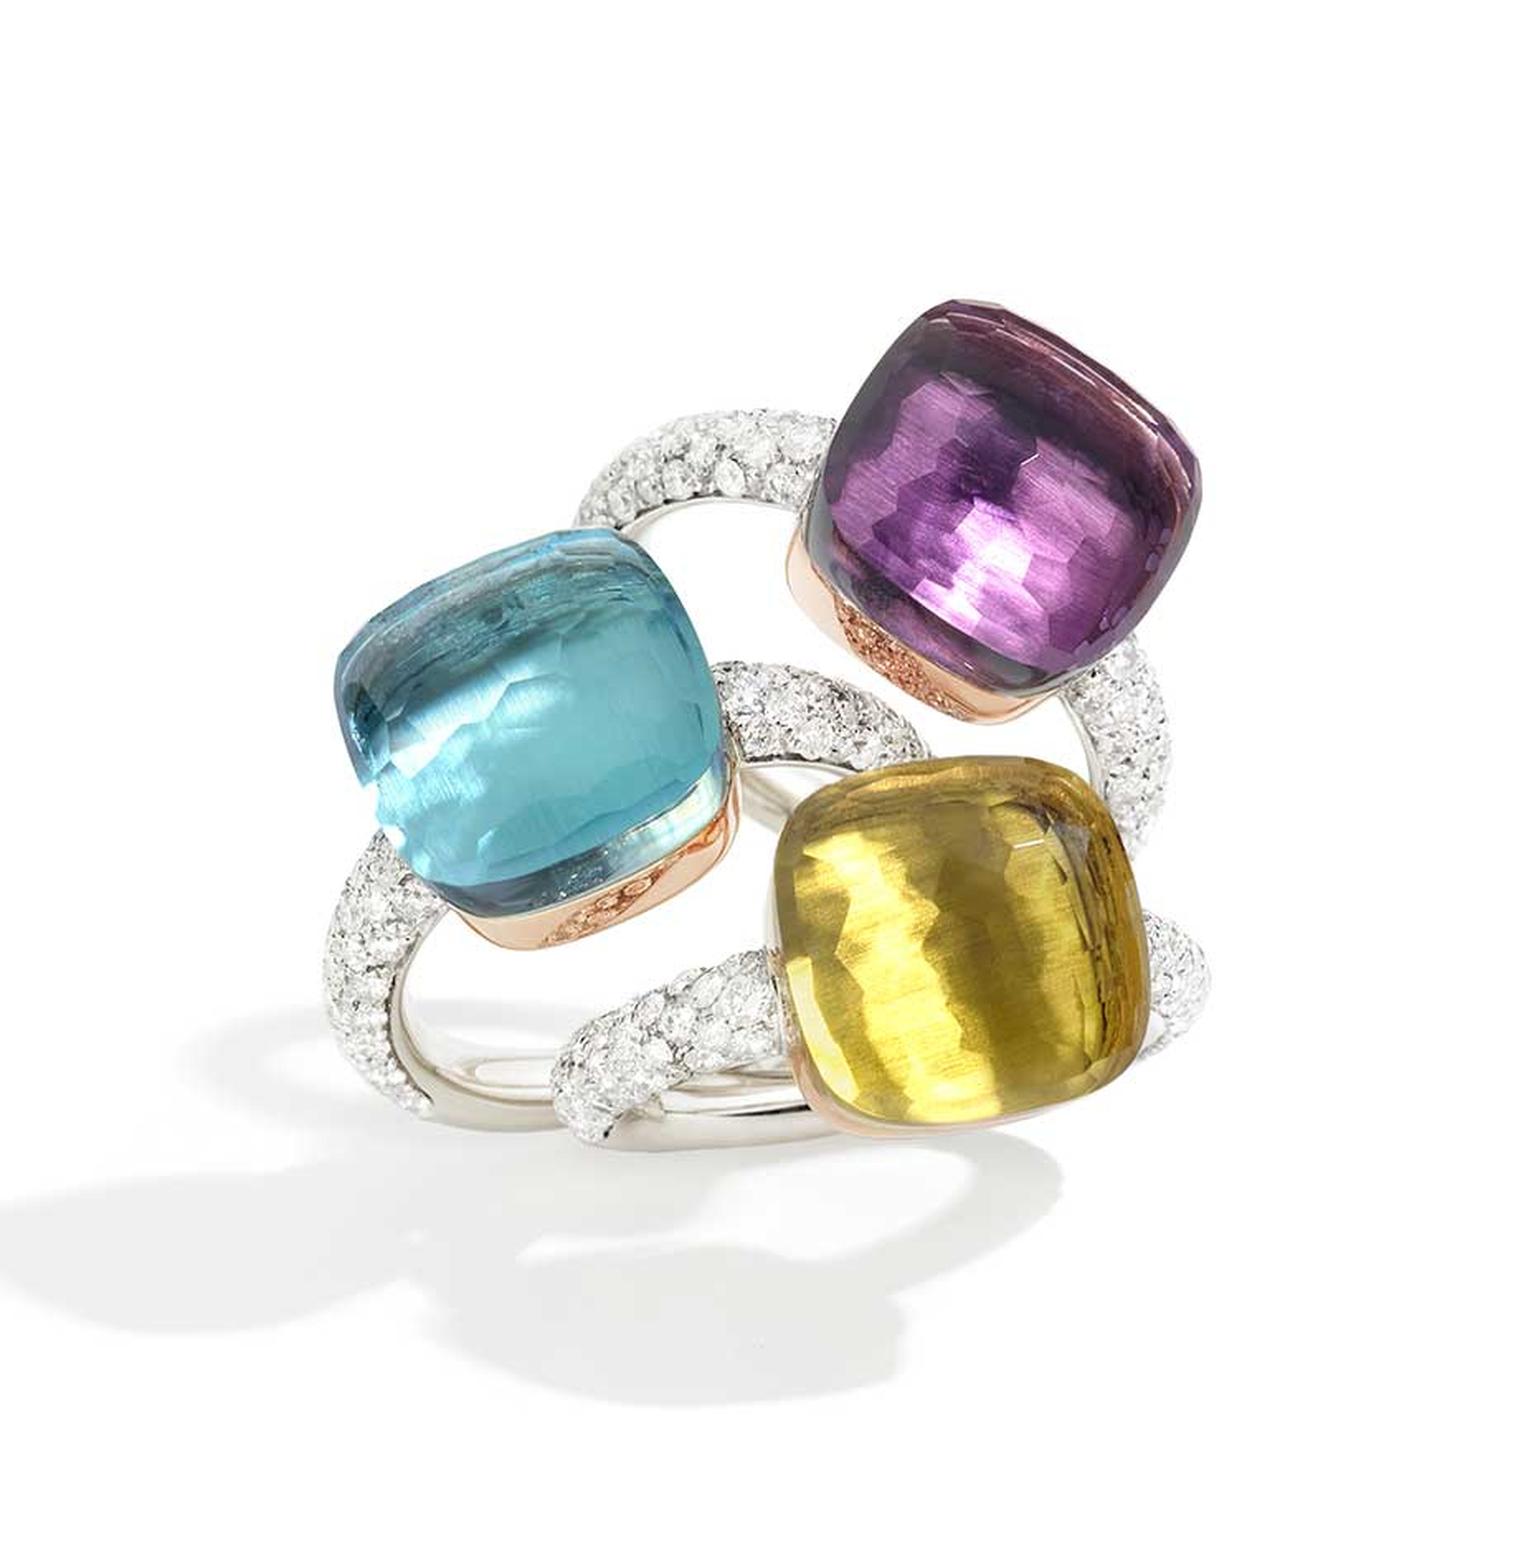 This season, the Italian jeweller Pomellato makes it easier to find the perfect Christmas gift as new versions of its classic Nudo ring in white gold, set with an amethyst, blue topaz and lemon quartz, are presented with the addition of diamonds.